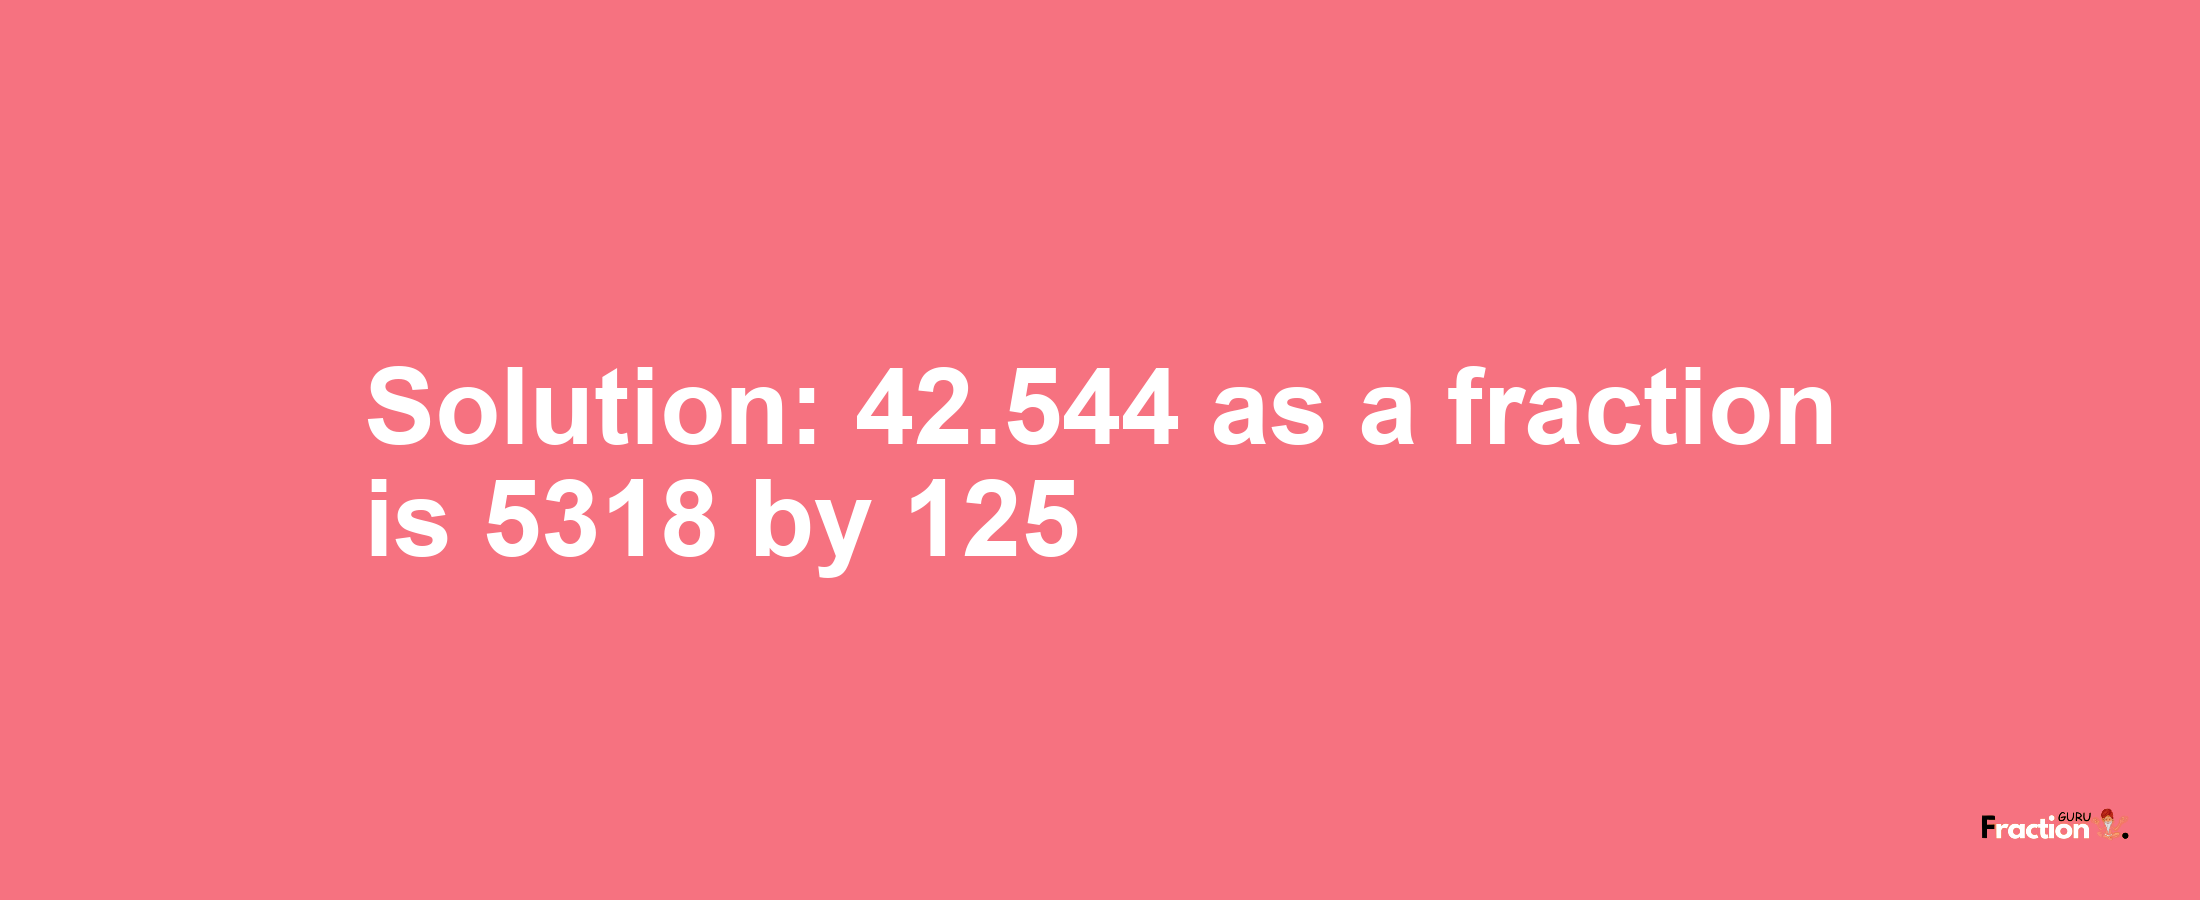 Solution:42.544 as a fraction is 5318/125